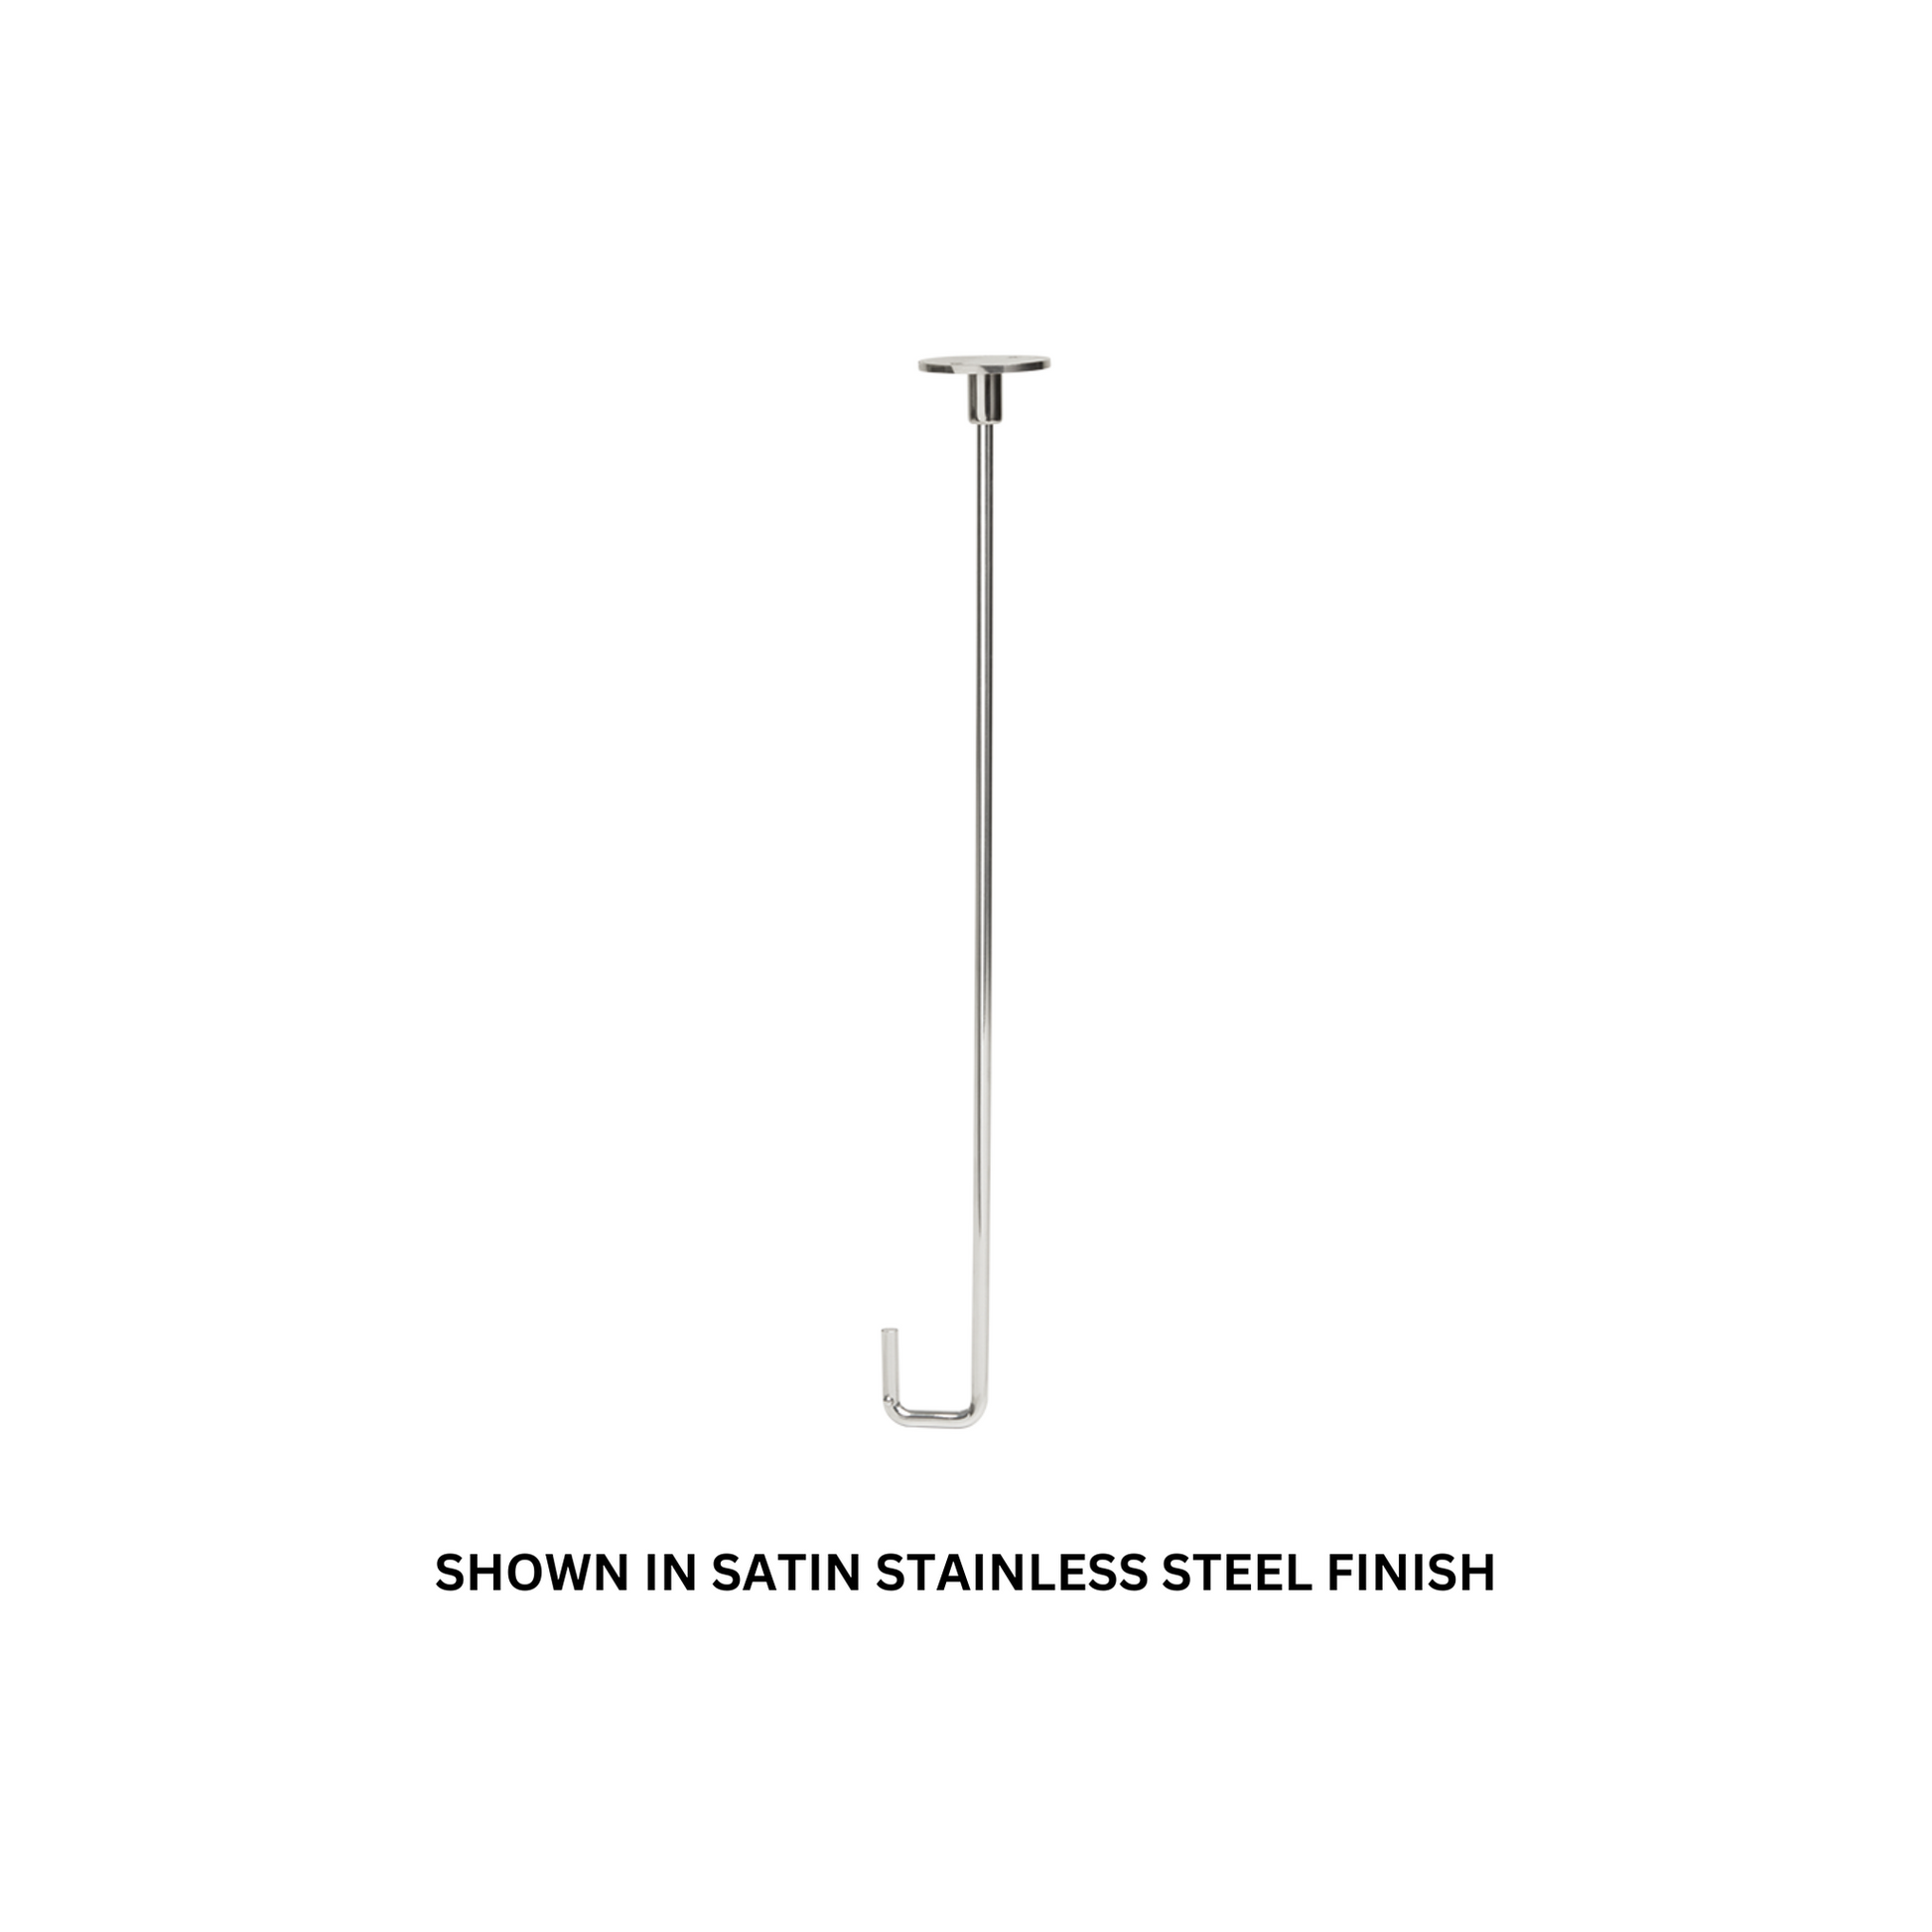 Seachrome Signature Series 24" Bronze Powder Coat J-Hook Ceiling Support for L-Shaped Shower Rods